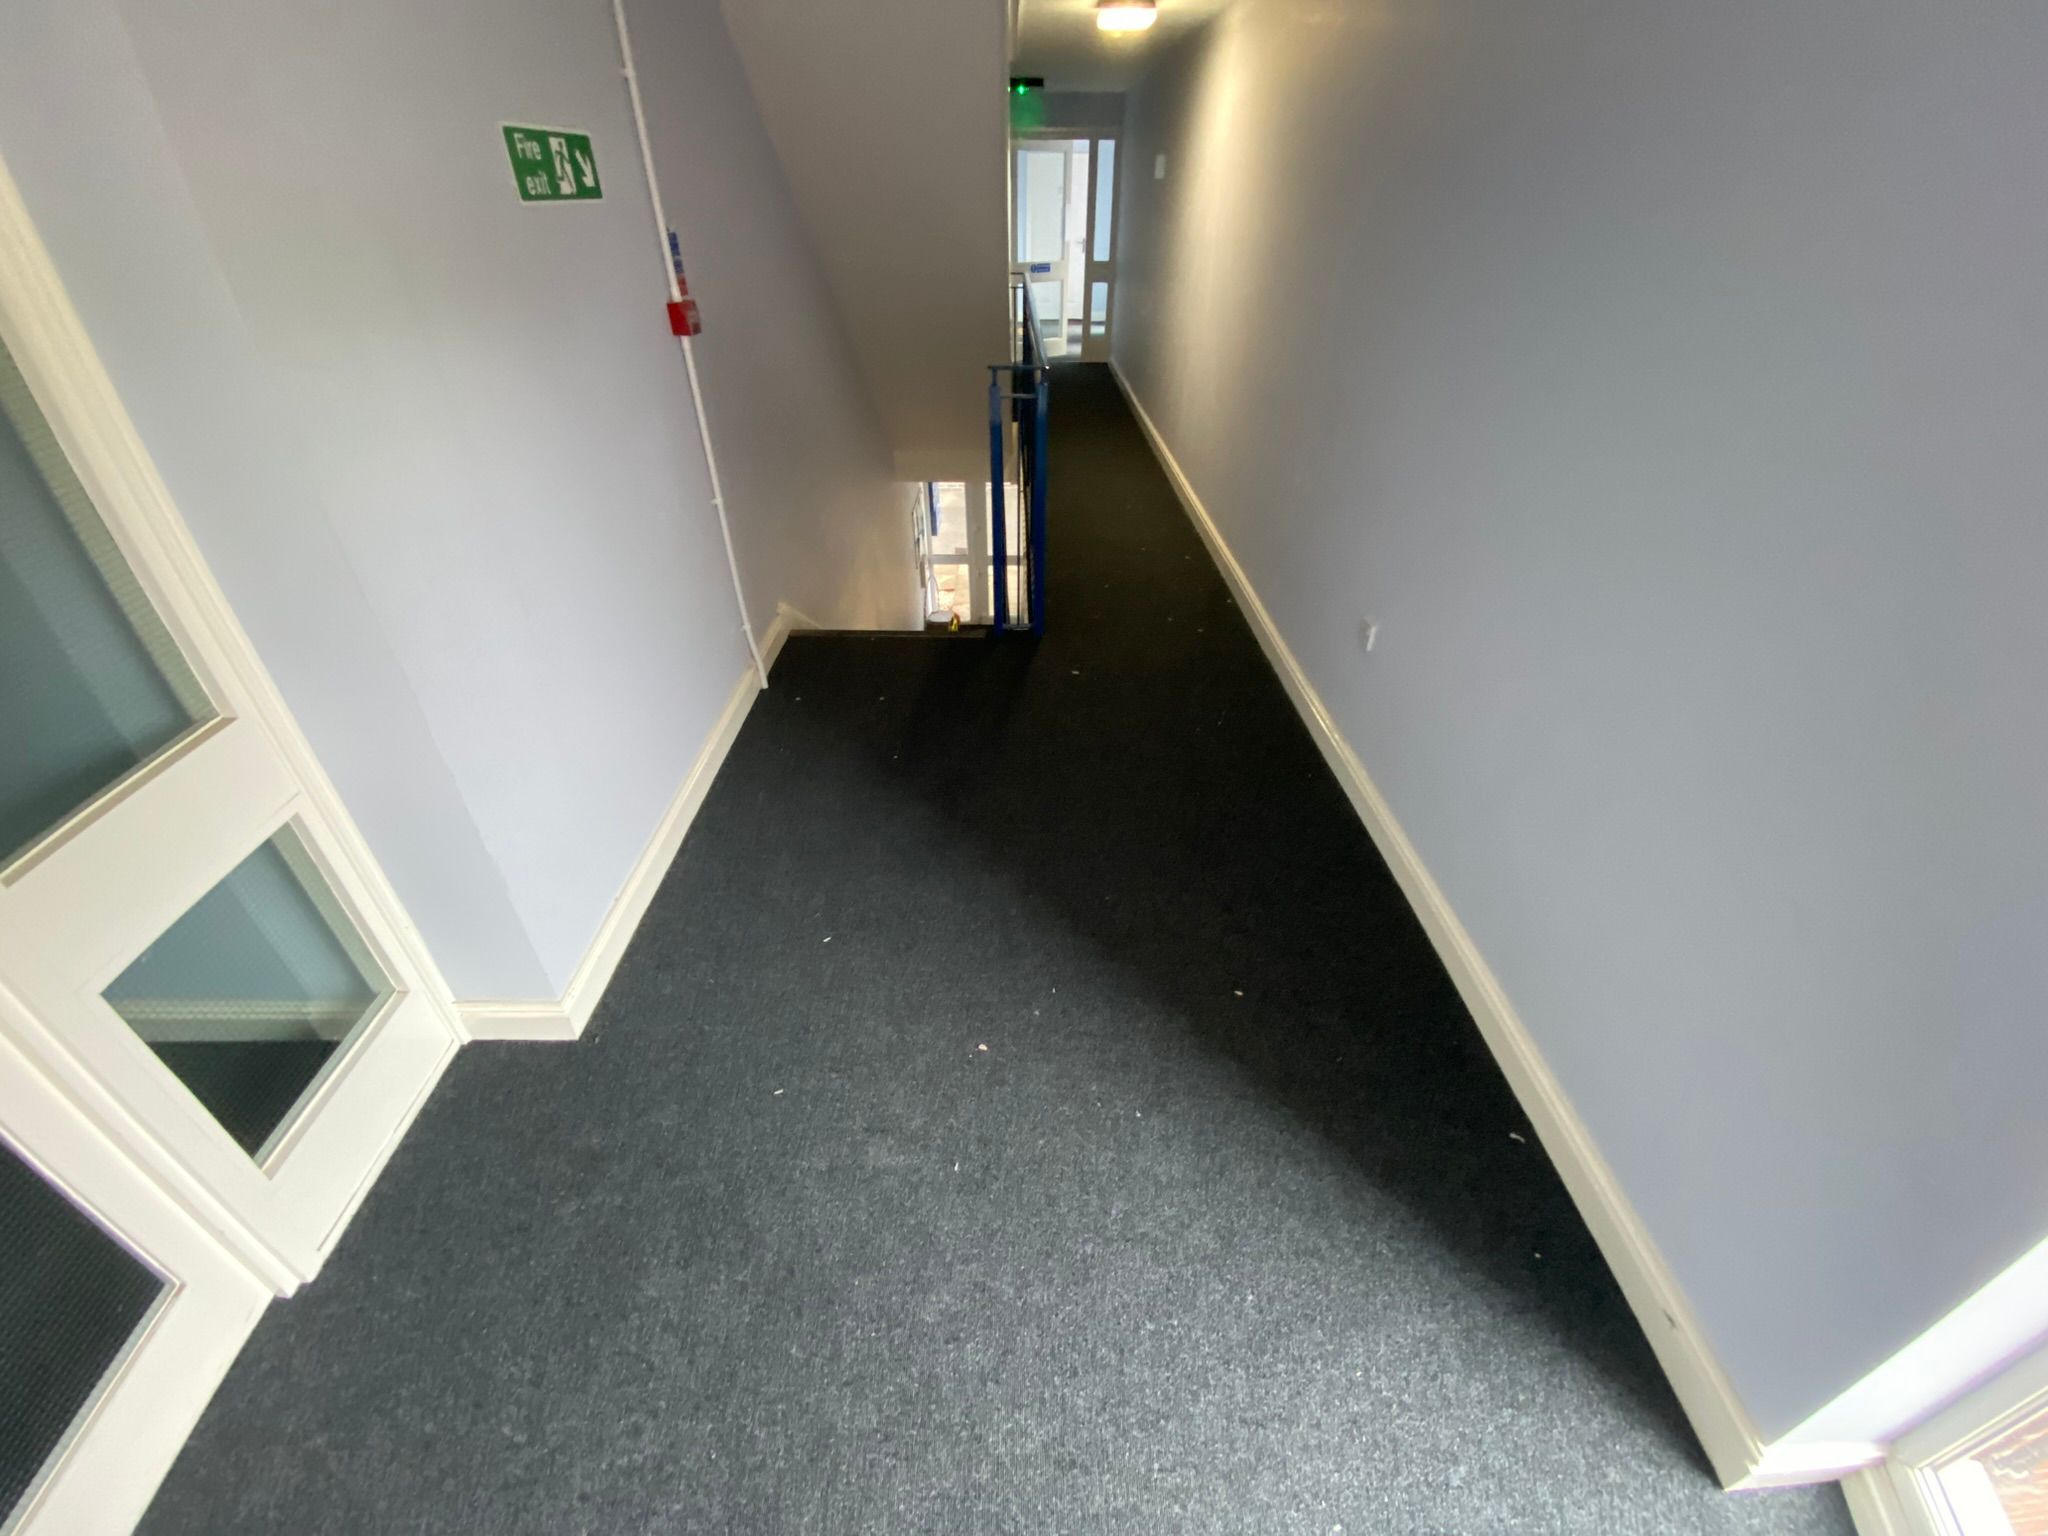 Completed Project with Samson Rib Commercial Carpet